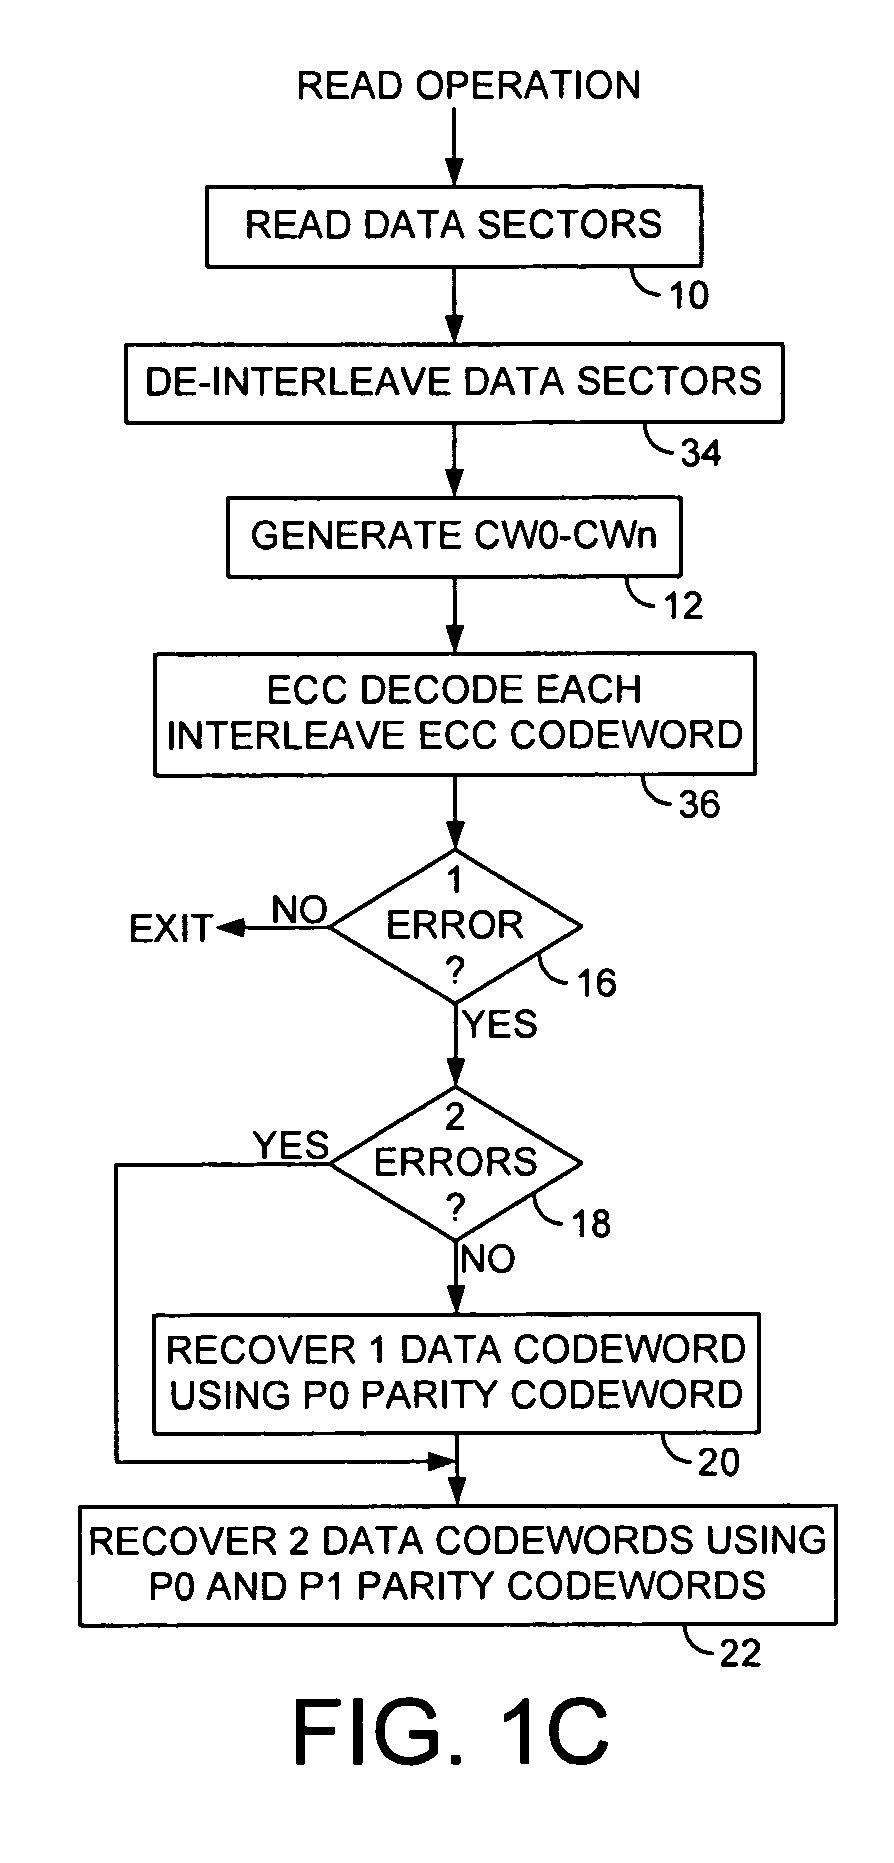 Disk drive recovering multiple codewords in data sectors using progressively higher order parity codewords